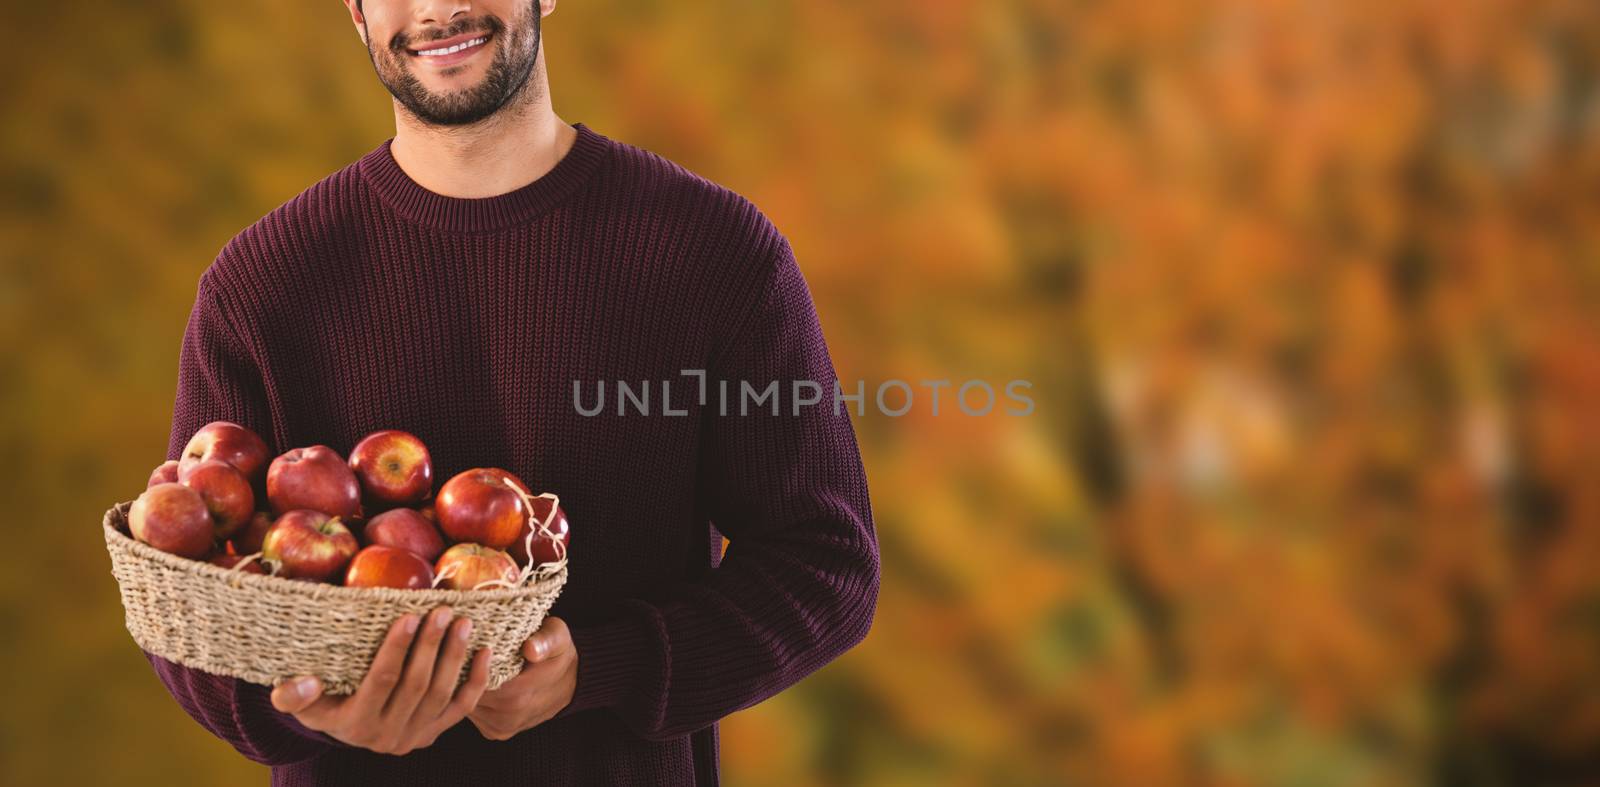 Portrait of man holding basket with apples against tree growing outdoors